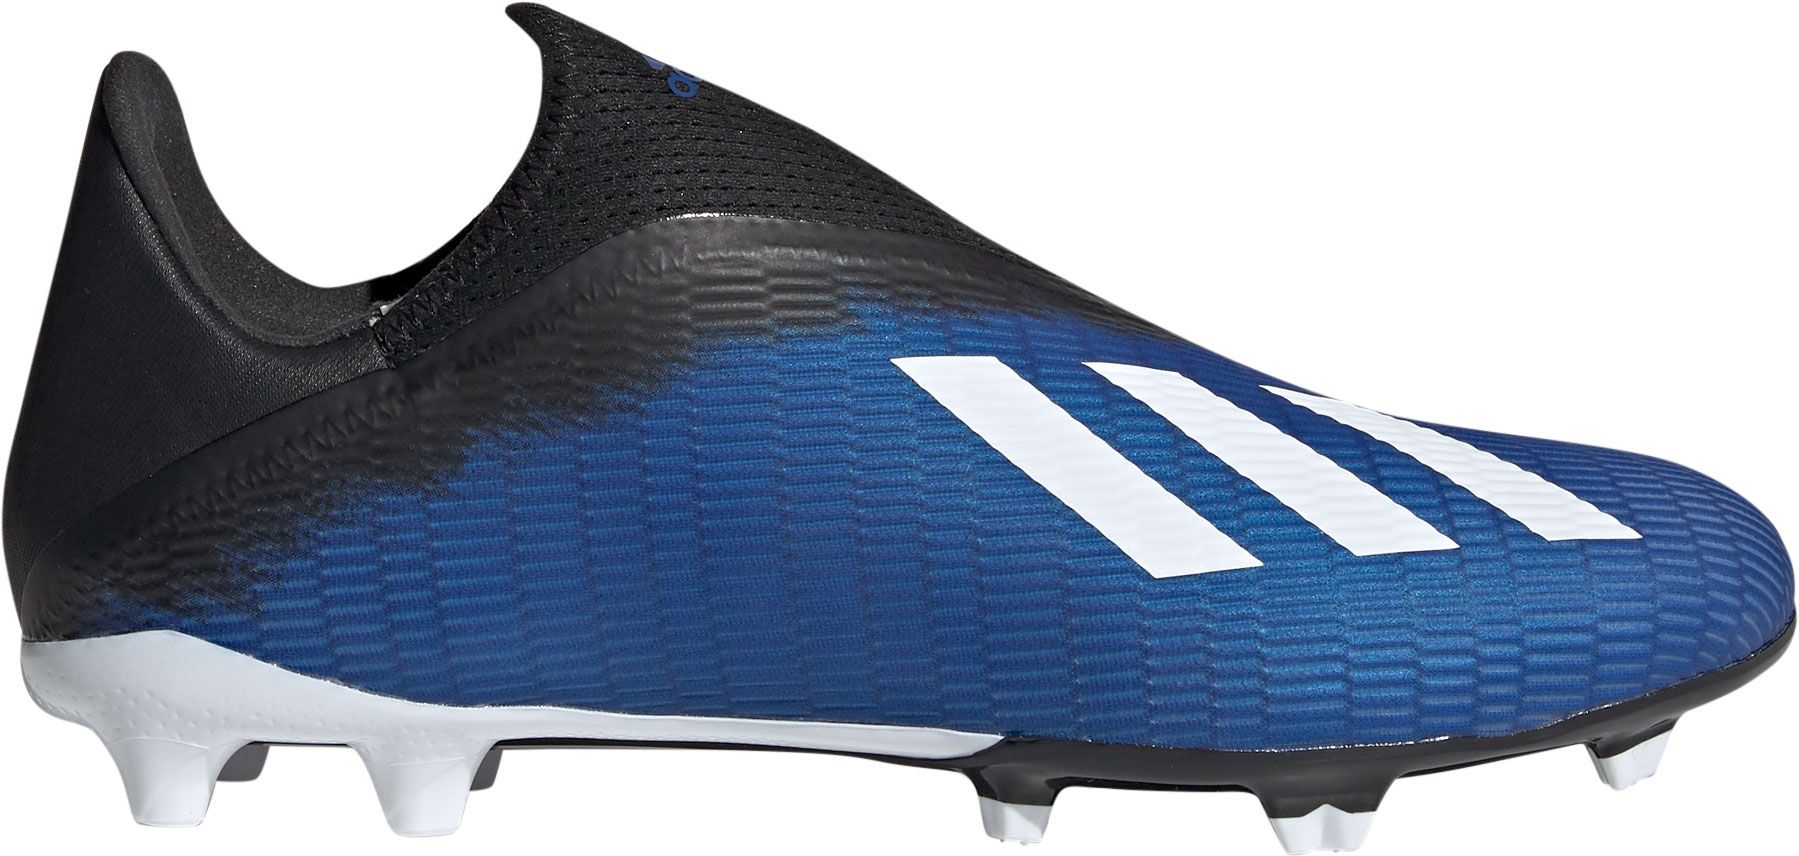 laceless cleats